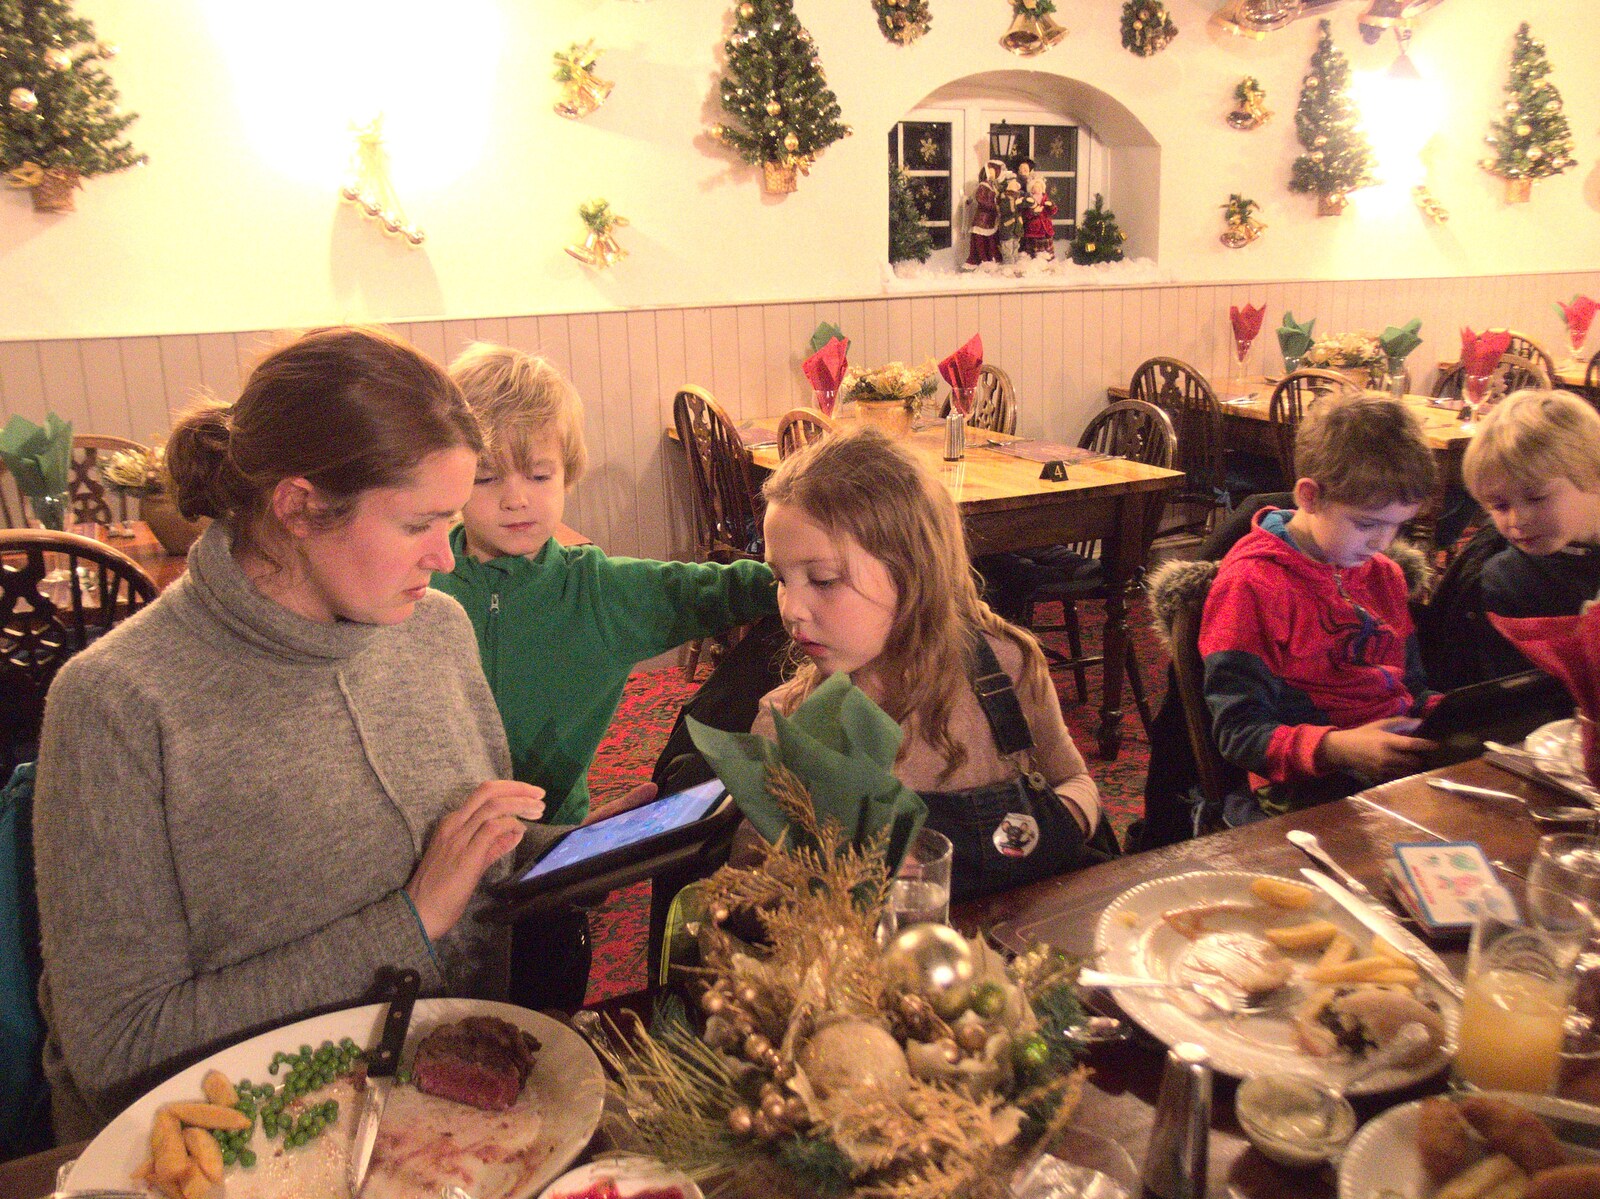 Isobel sets the tablet up from An End-of-Year Trip to Spreyton, Devon - 29th December 2017